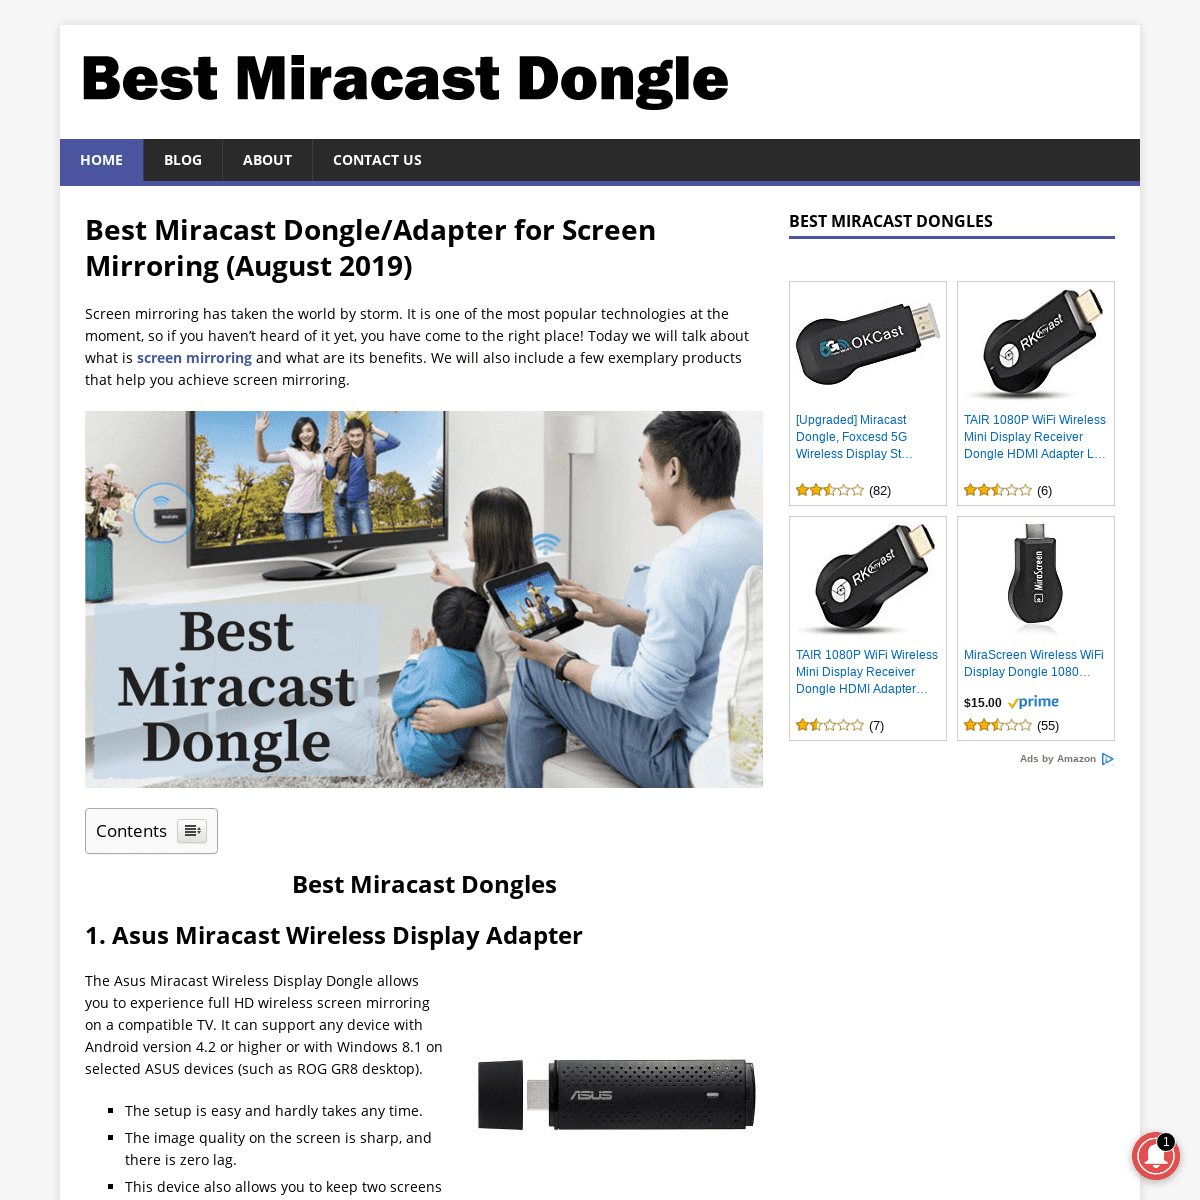 Best Miracast Dongle/Adapter for Screen Mirroring (August 2019)